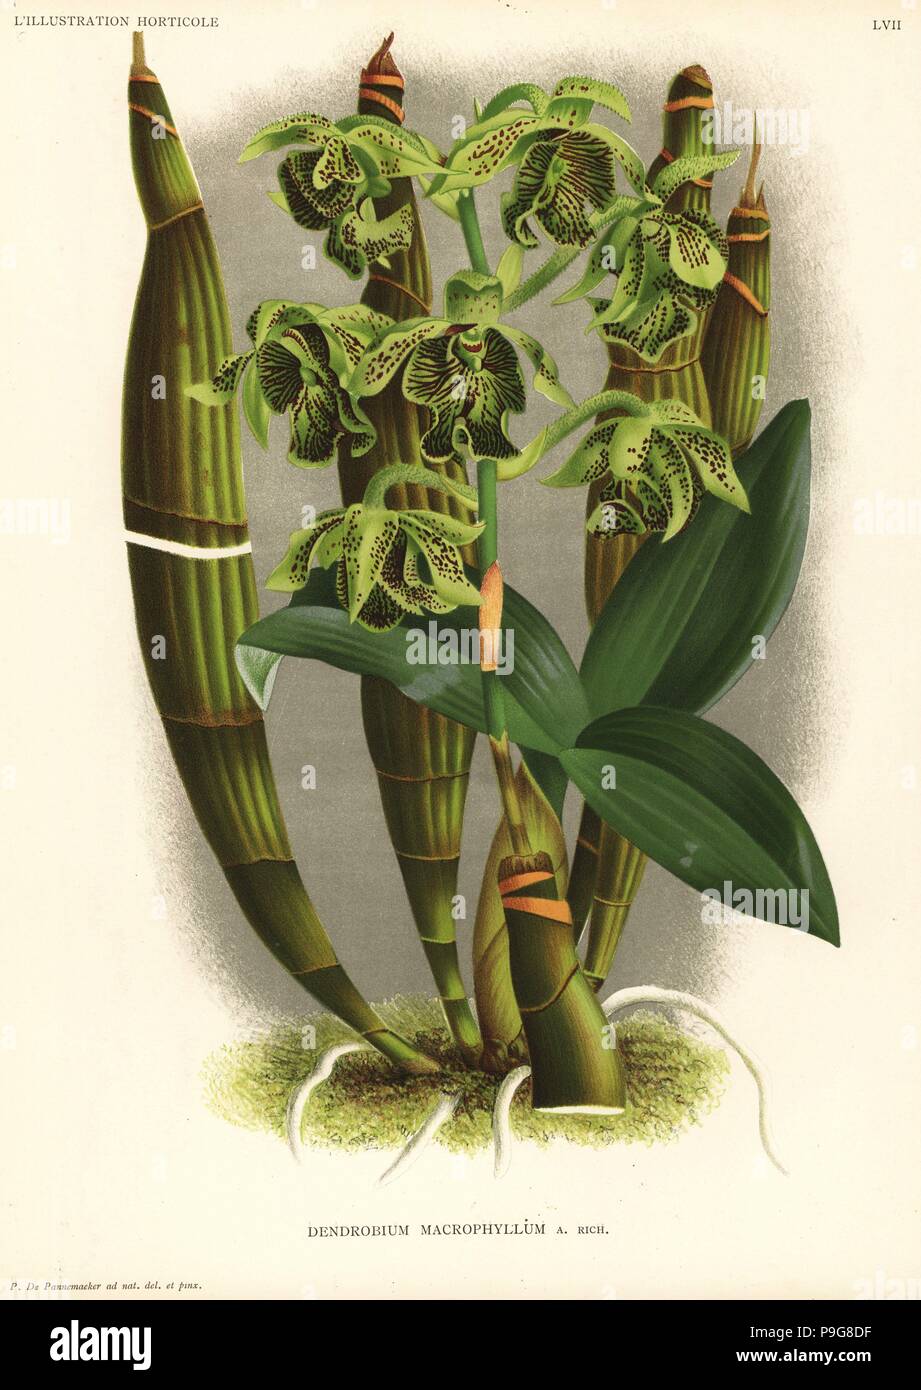 Pastor's orchid, Dendrobium macrophyllum. Drawn and chromolithographed by Pieter de Pannemaeker from Jean Linden's l'Illustration Horticole, Brussels, 1888. Stock Photo